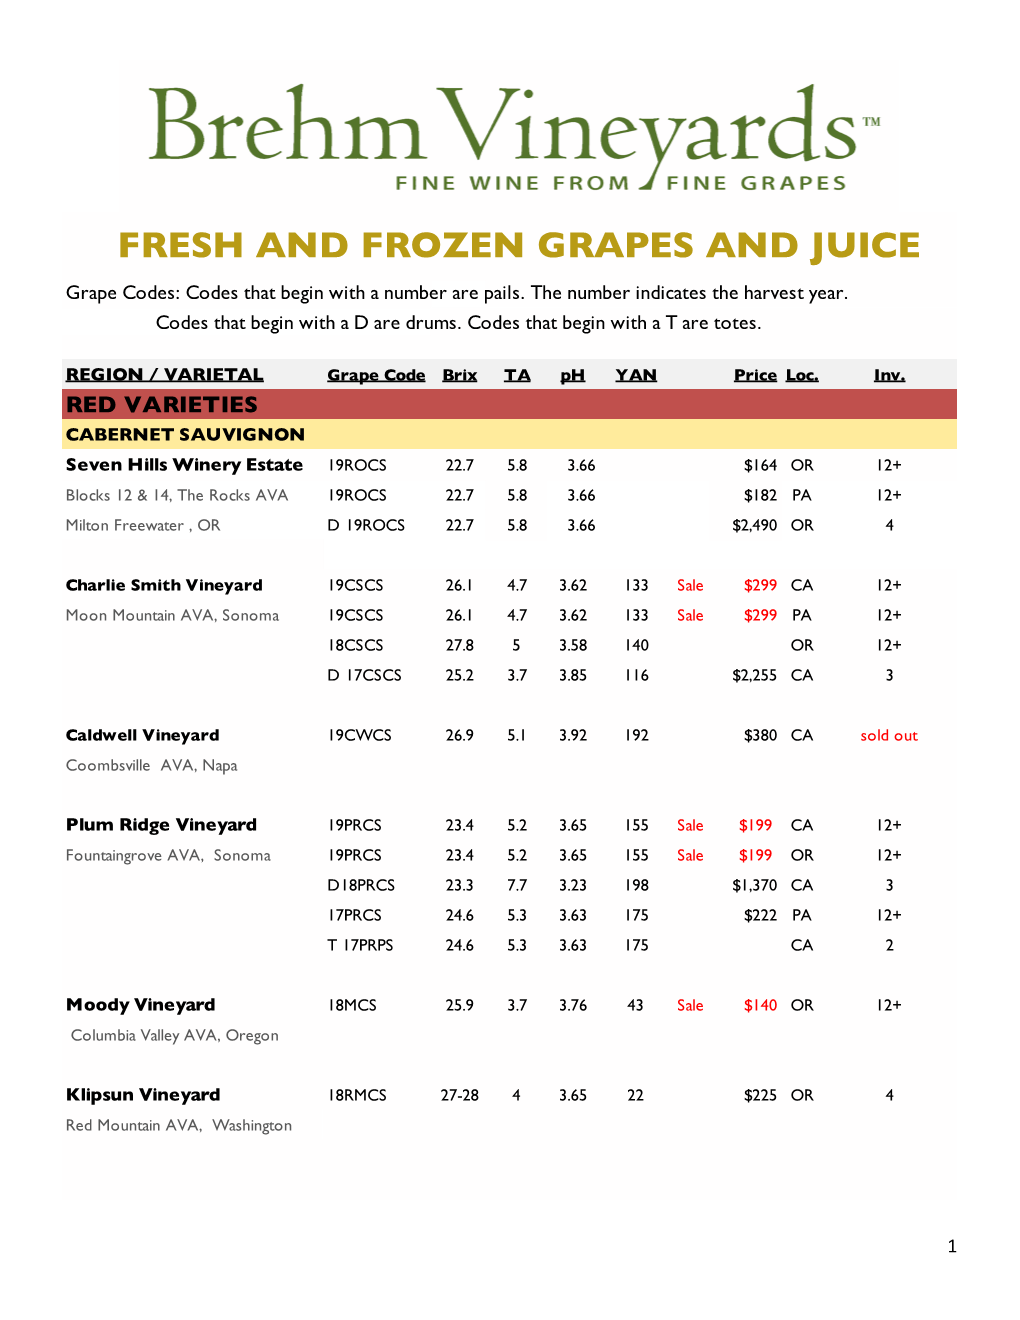 Grapes Inventory and Pricing 3.30.2020